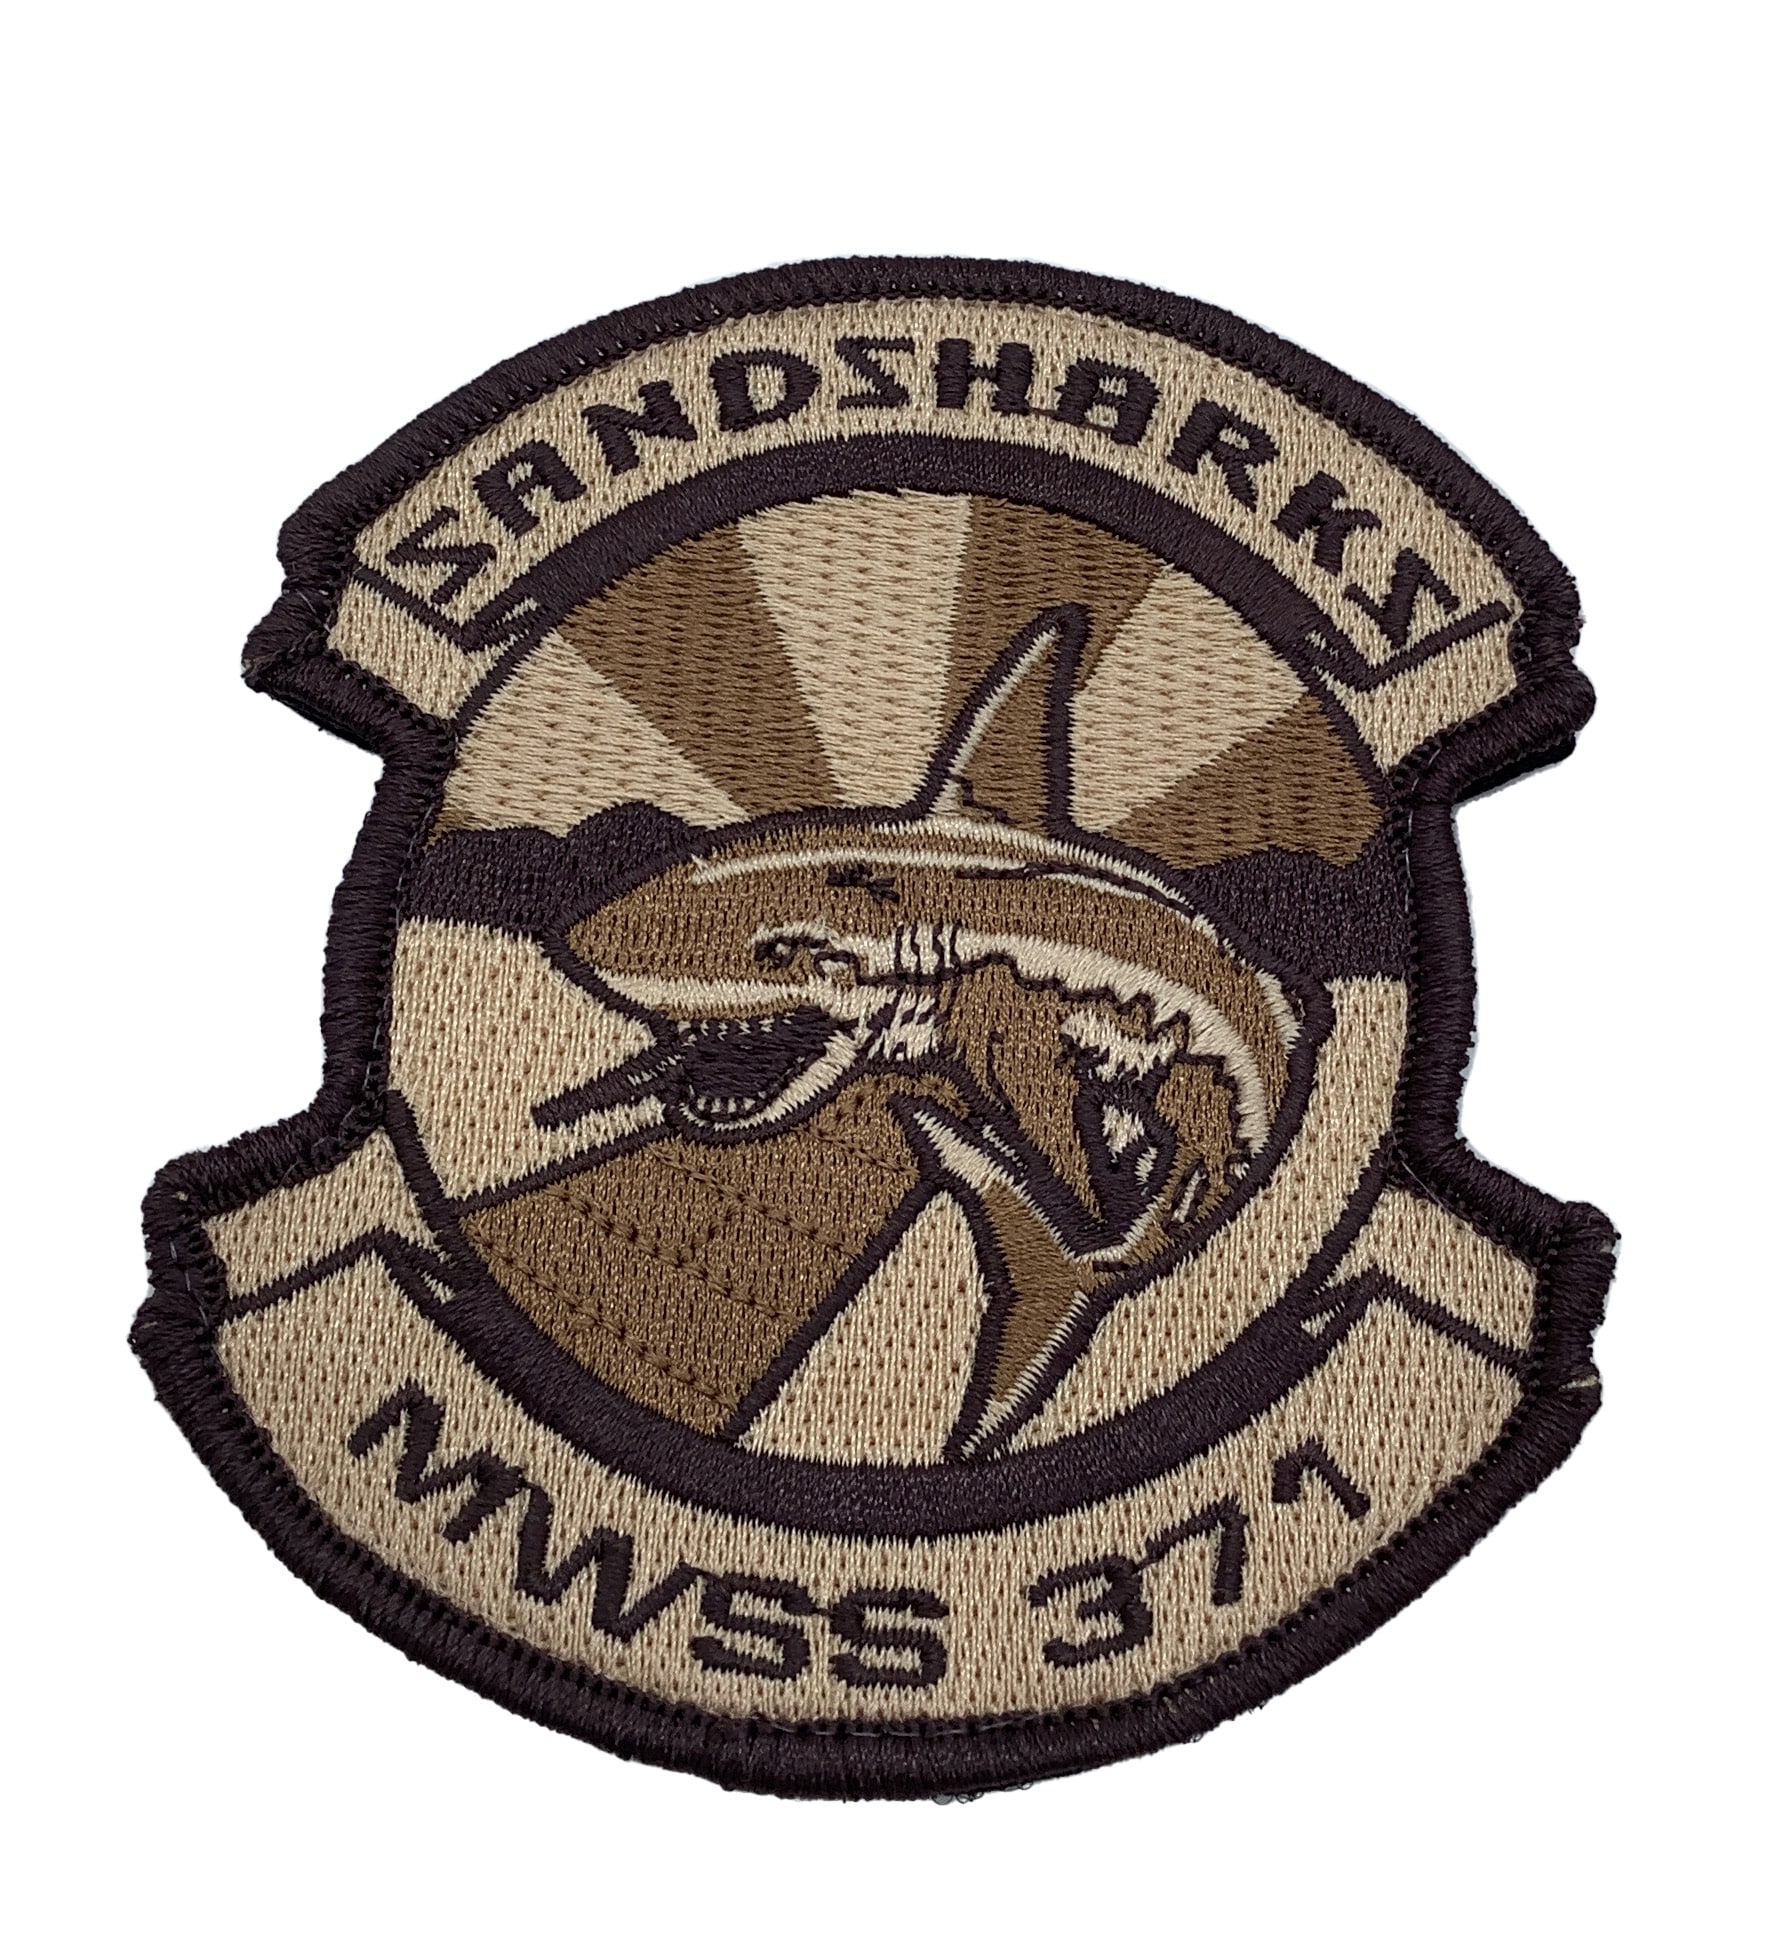 MWSS-371 Sandsharks (Tan) Patch – With Hook and Loop - Squadron Nostalgia